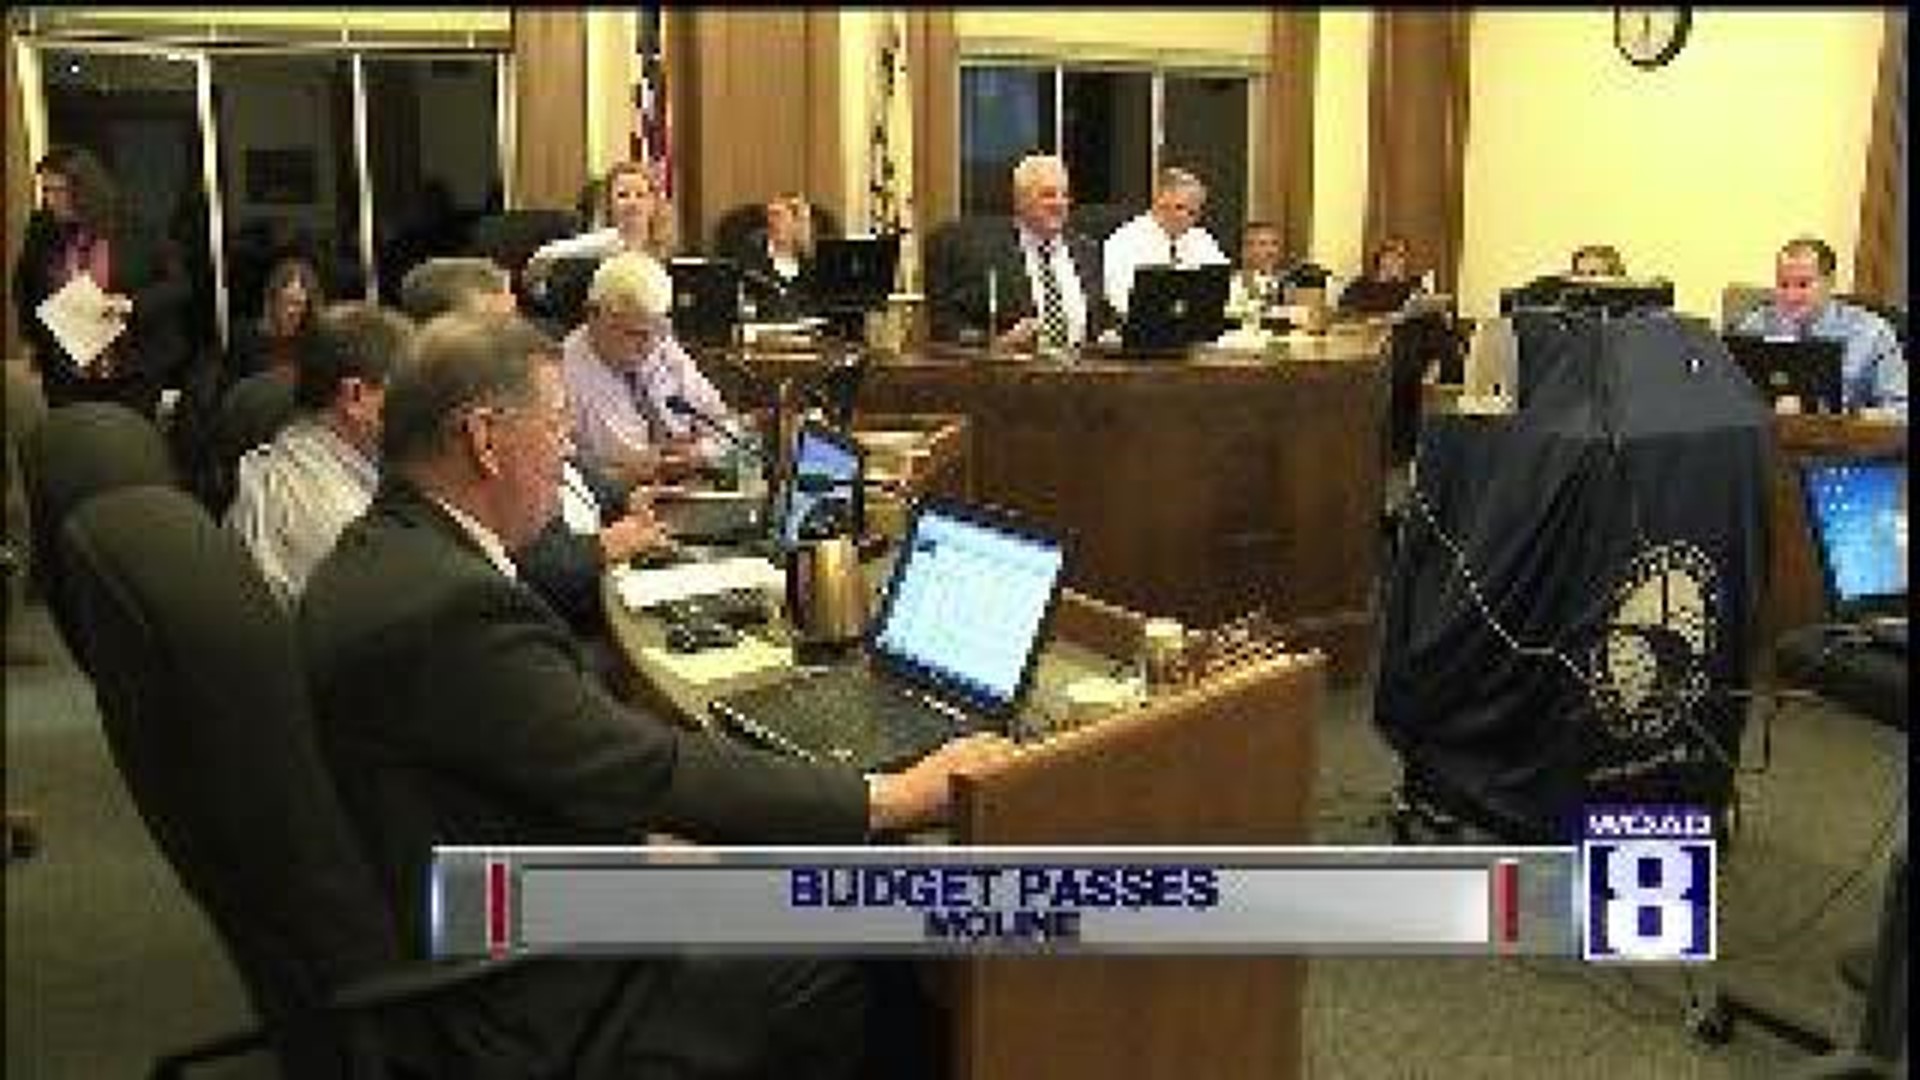 Moline approves budget, depot vote to come